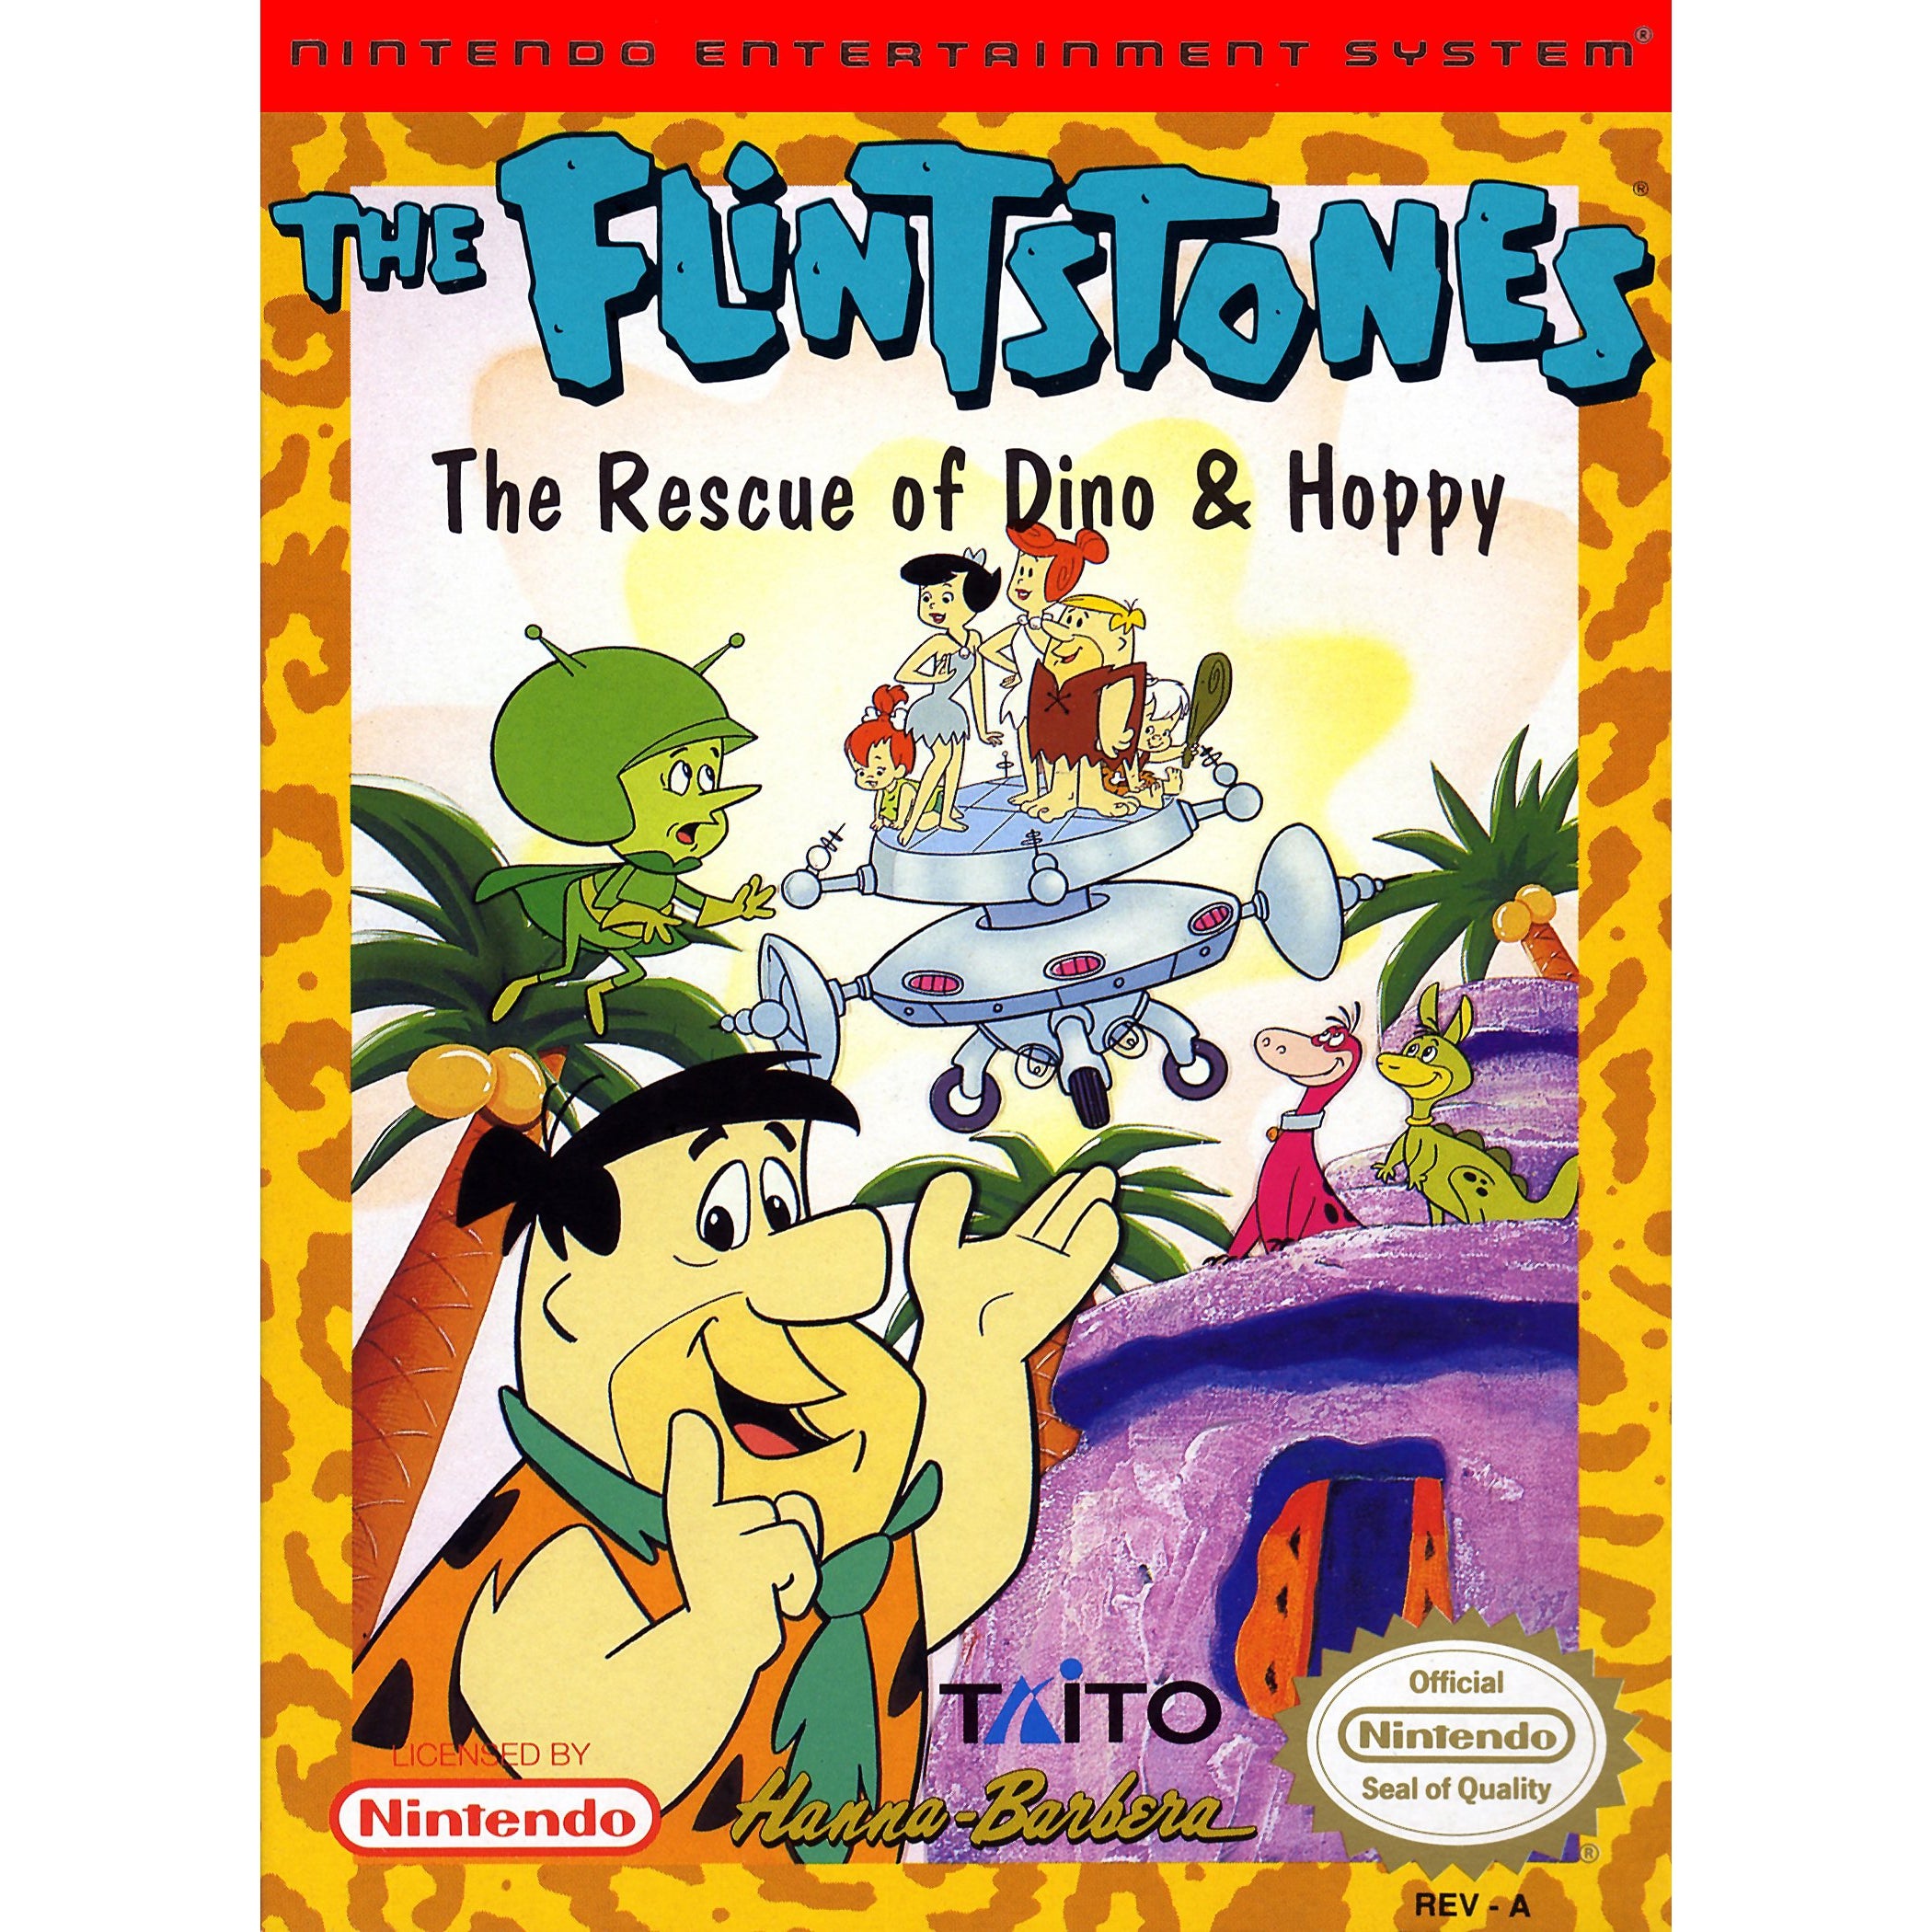 The Flintstones: The Rescue of Dino & Hoppy - Authentic NES Game Cartridge - YourGamingShop.com - Buy, Sell, Trade Video Games Online. 120 Day Warranty. Satisfaction Guaranteed.